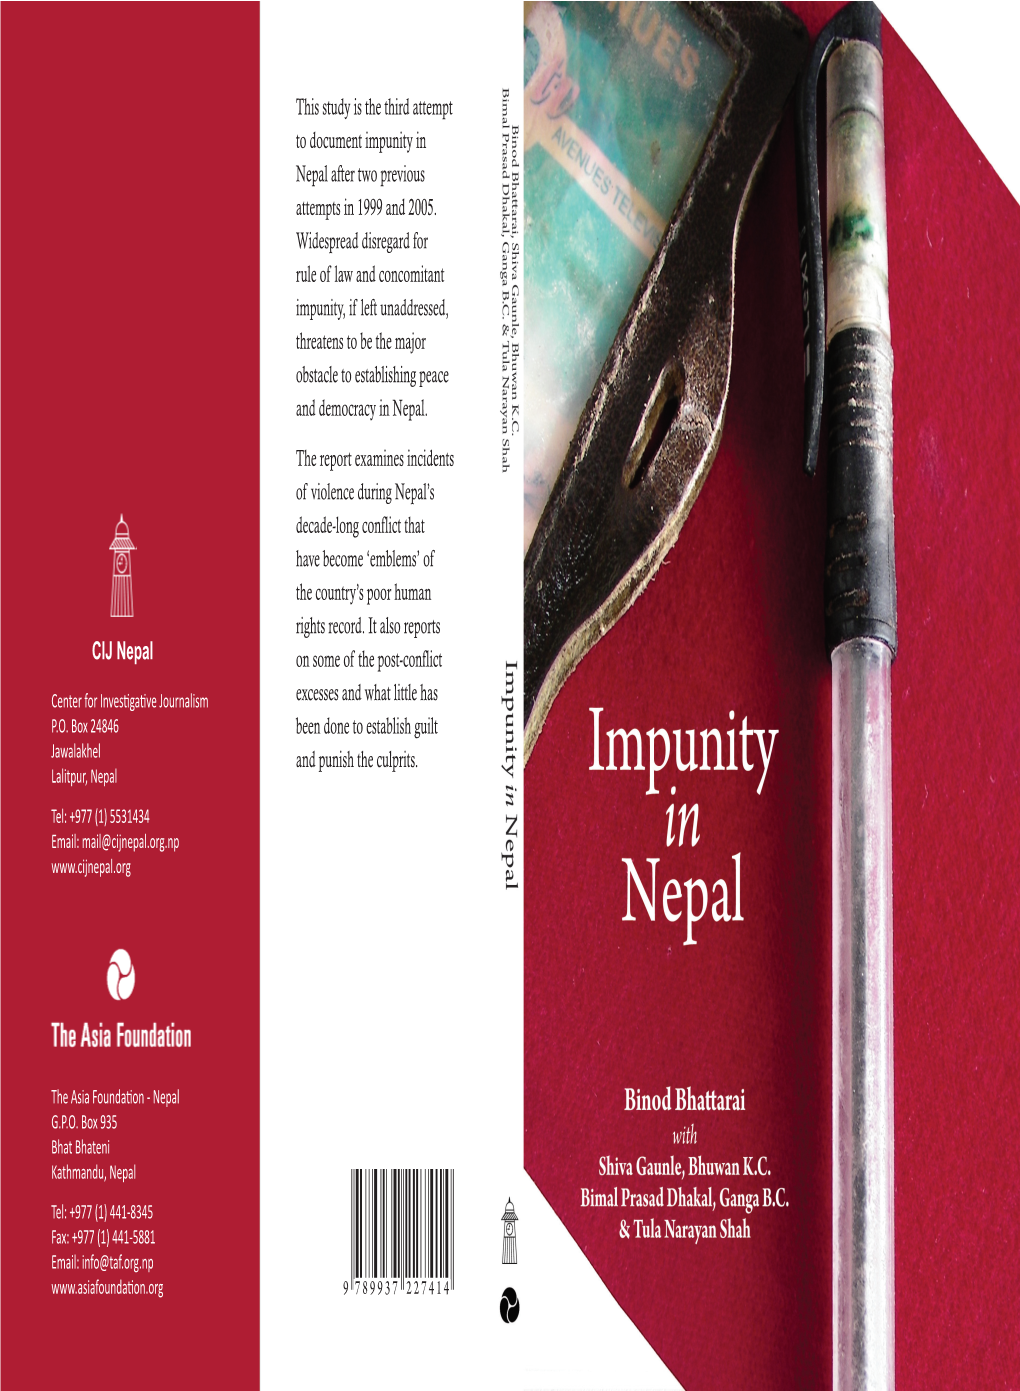 Impunity in Nepal After Two Previous Attempts in 1999 and 2005